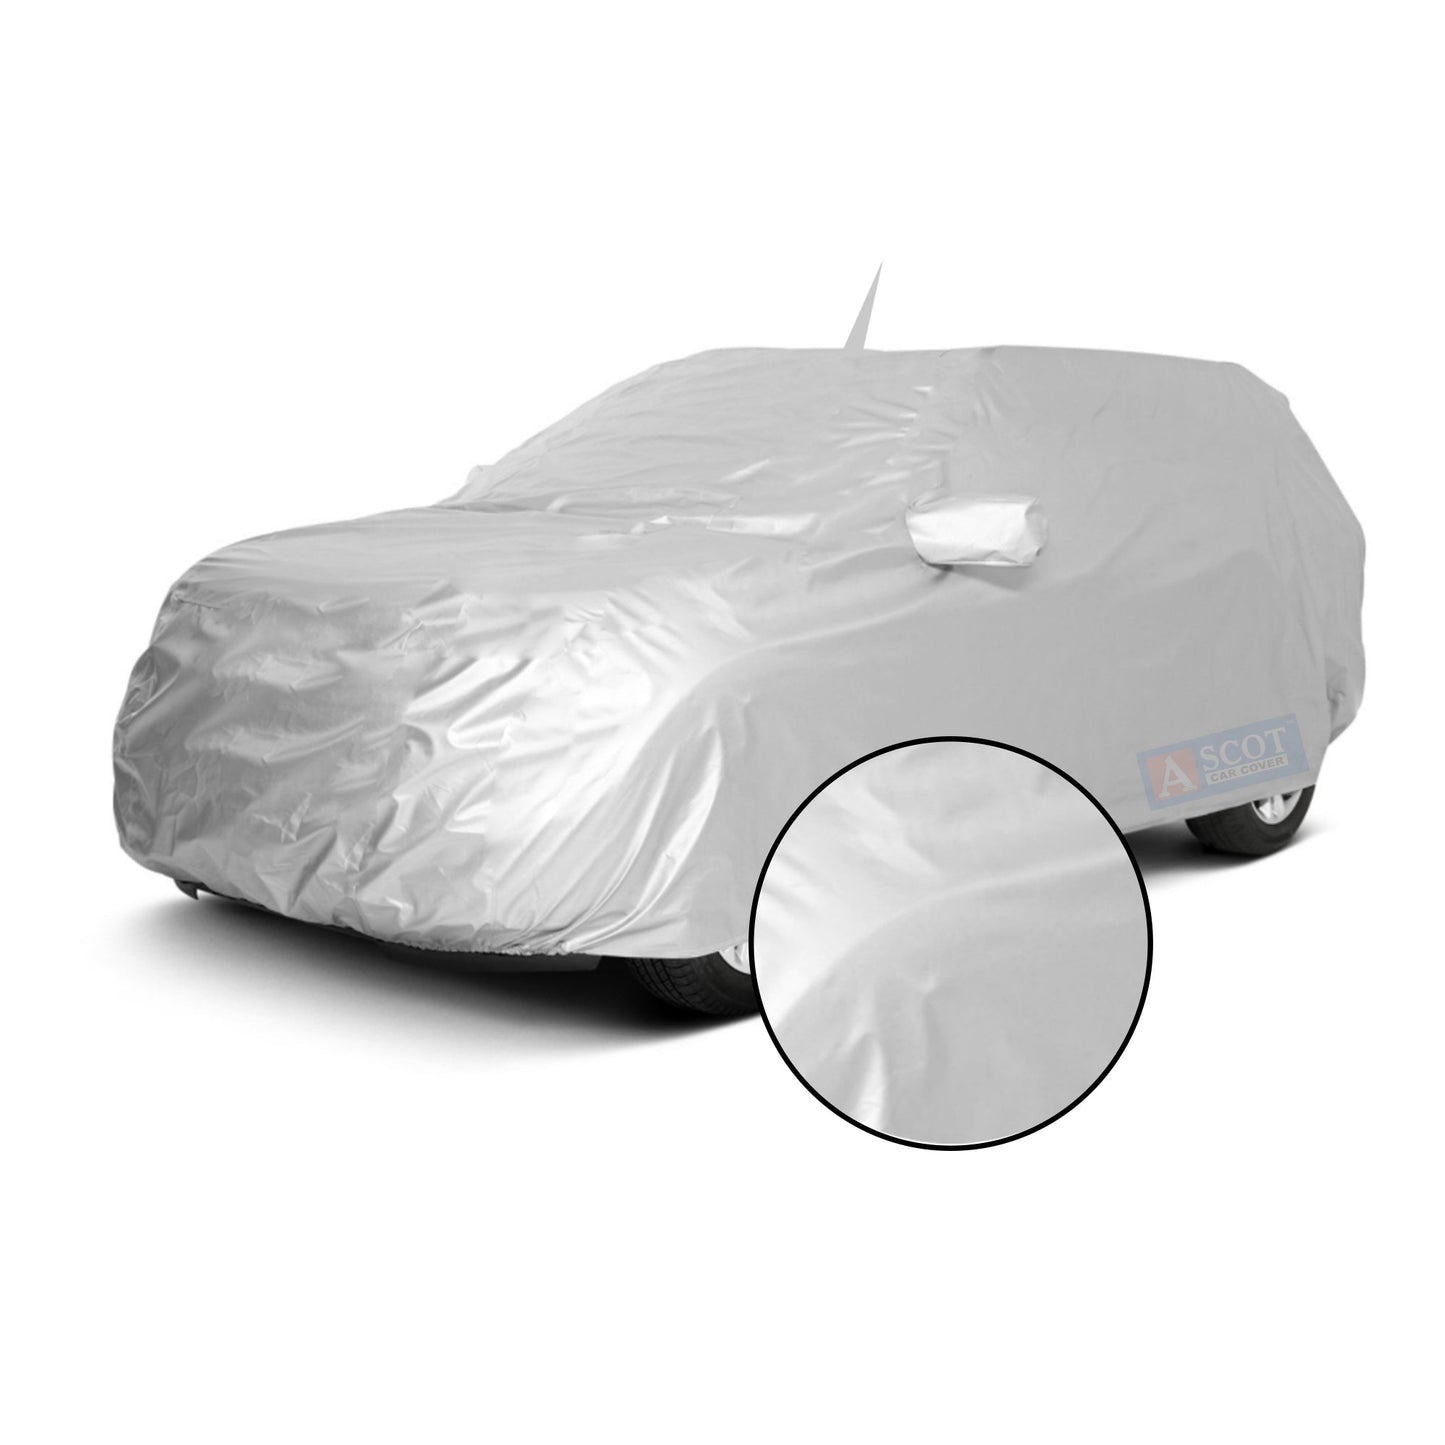 Ascot BMW 7 Series 2001-2009 Model Car Body Cover Dust Proof, Trippel Stitched